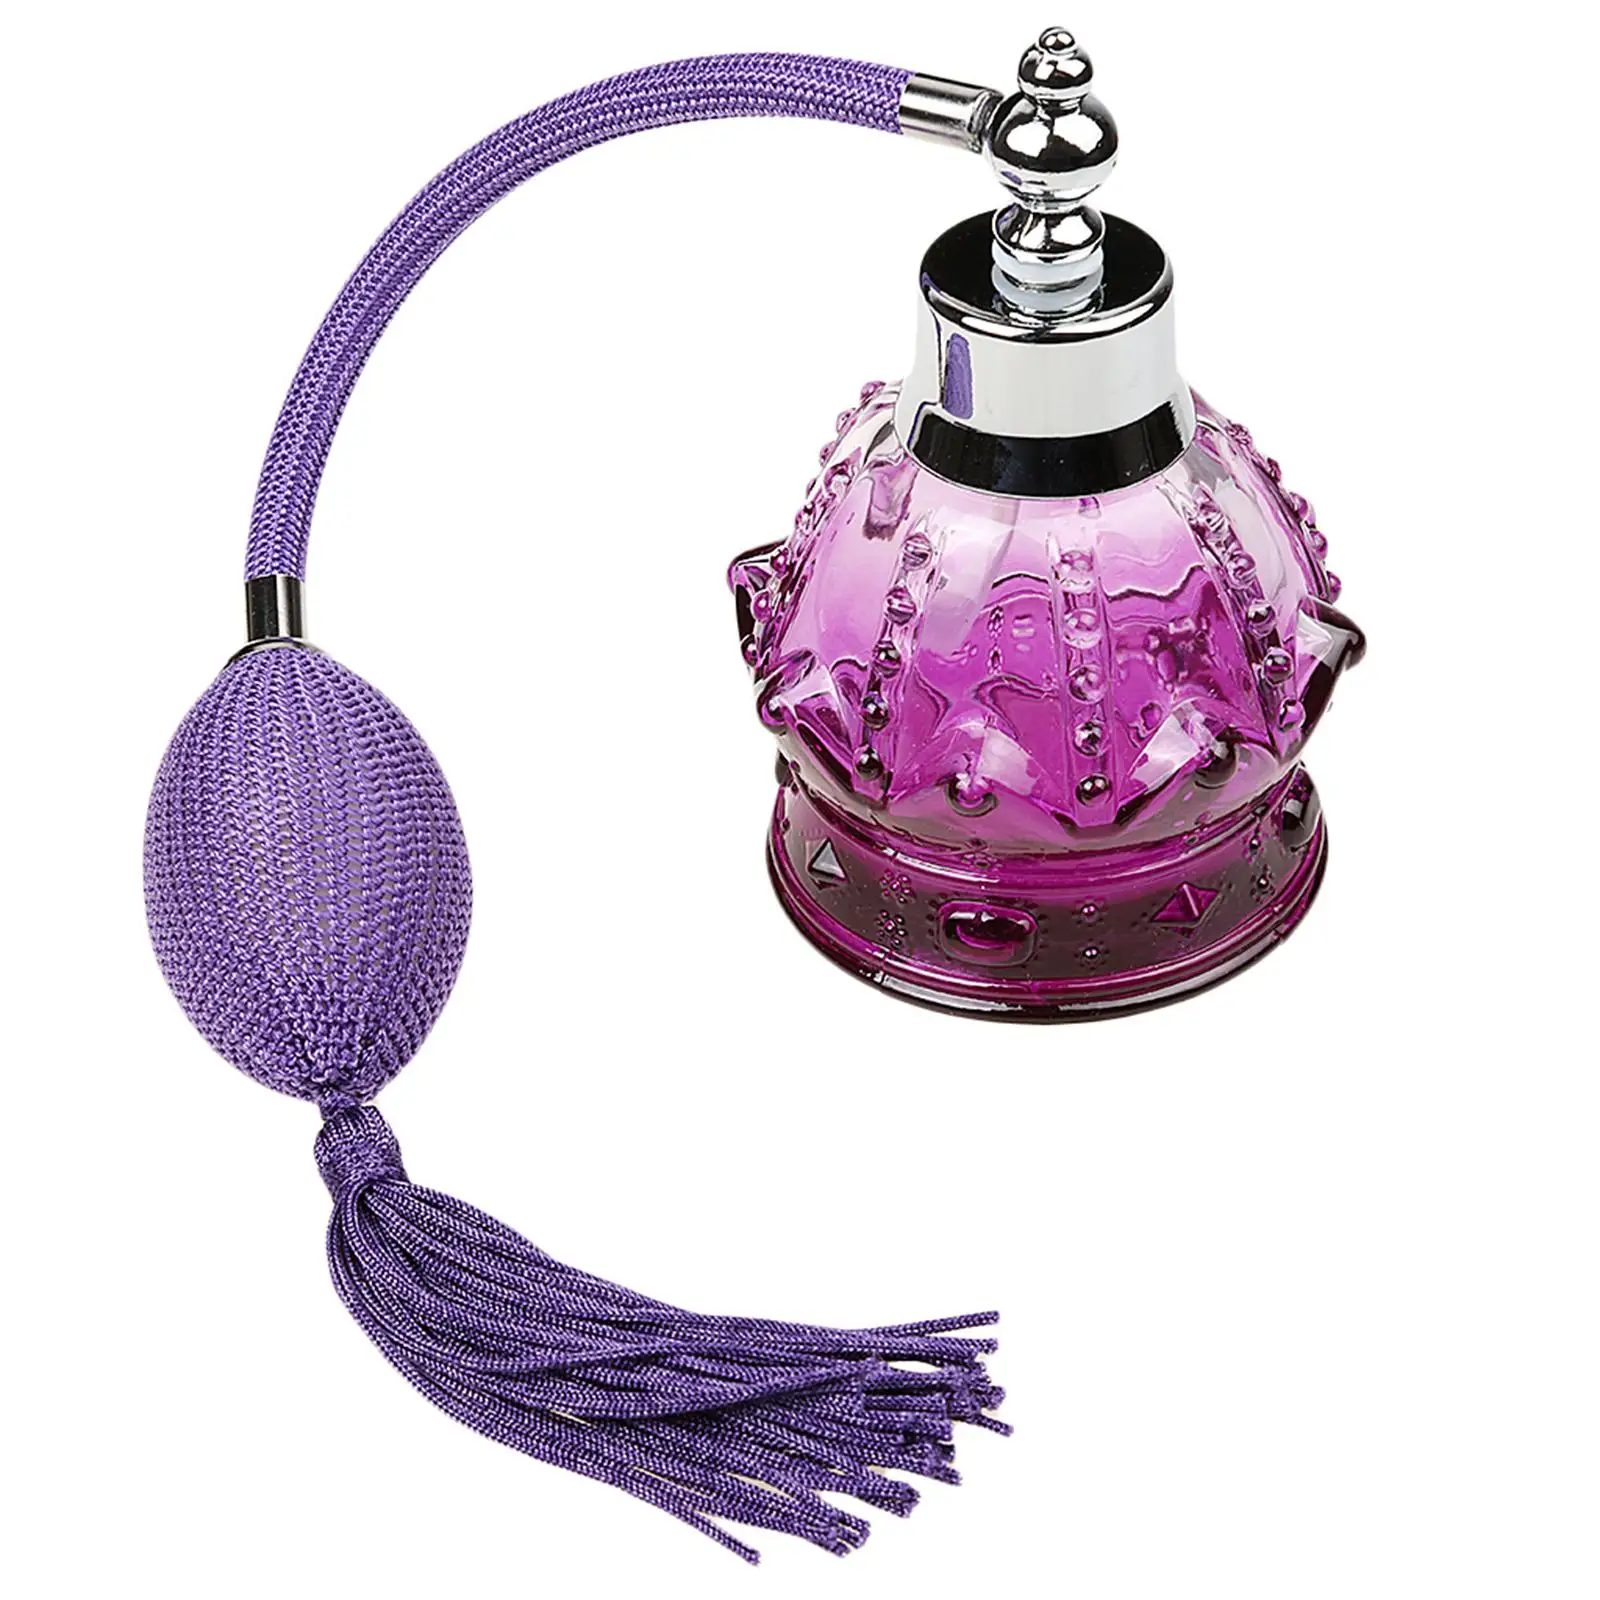  Perfume Bottle with Long Spray  Refillable Ldies Elegant Gift